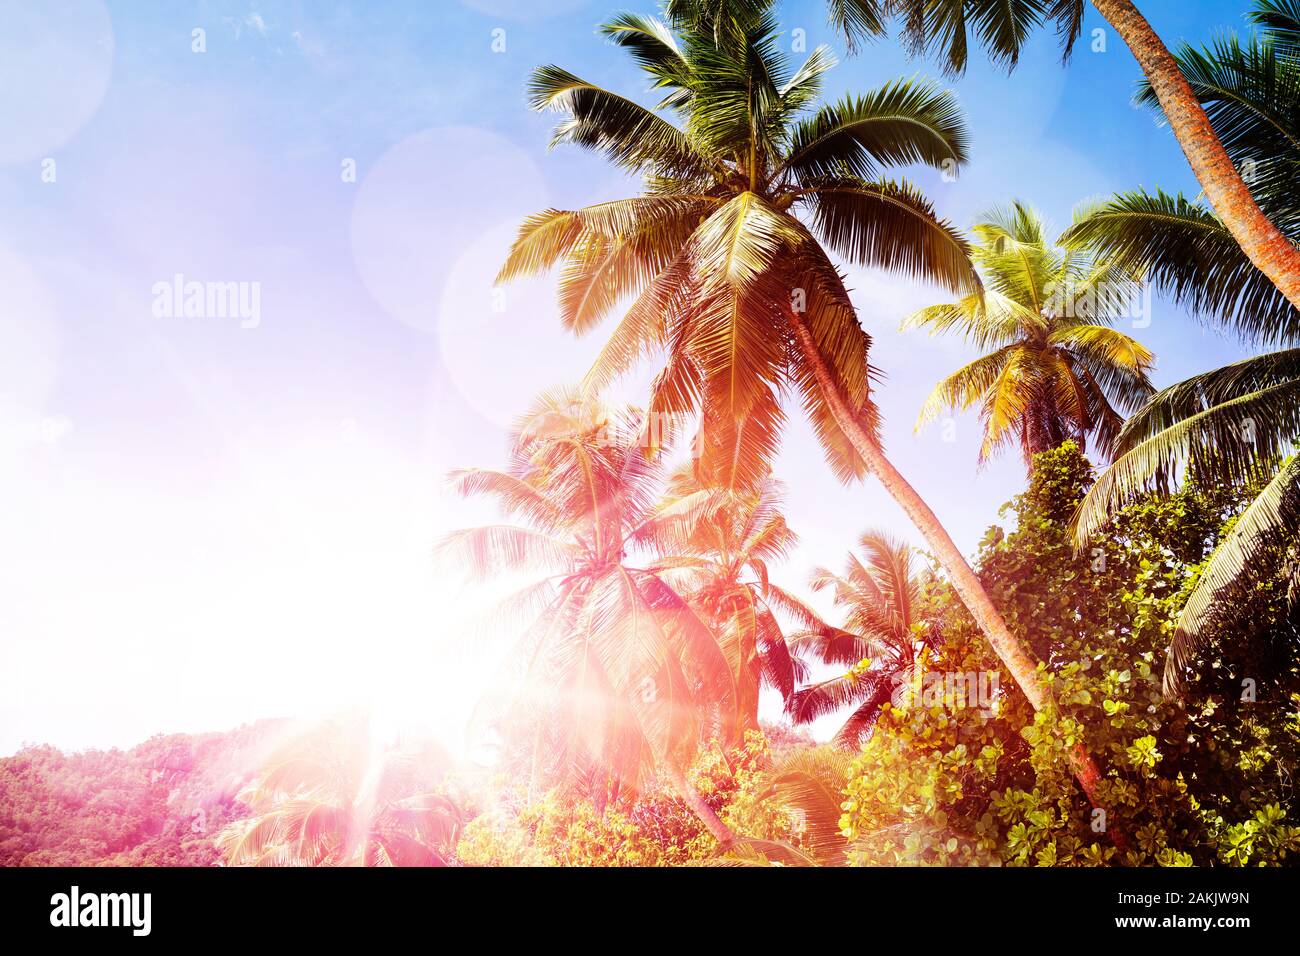 Scenic View Of Palm Trees With Lens Flare Against Clear Blue Sky Stock Photo